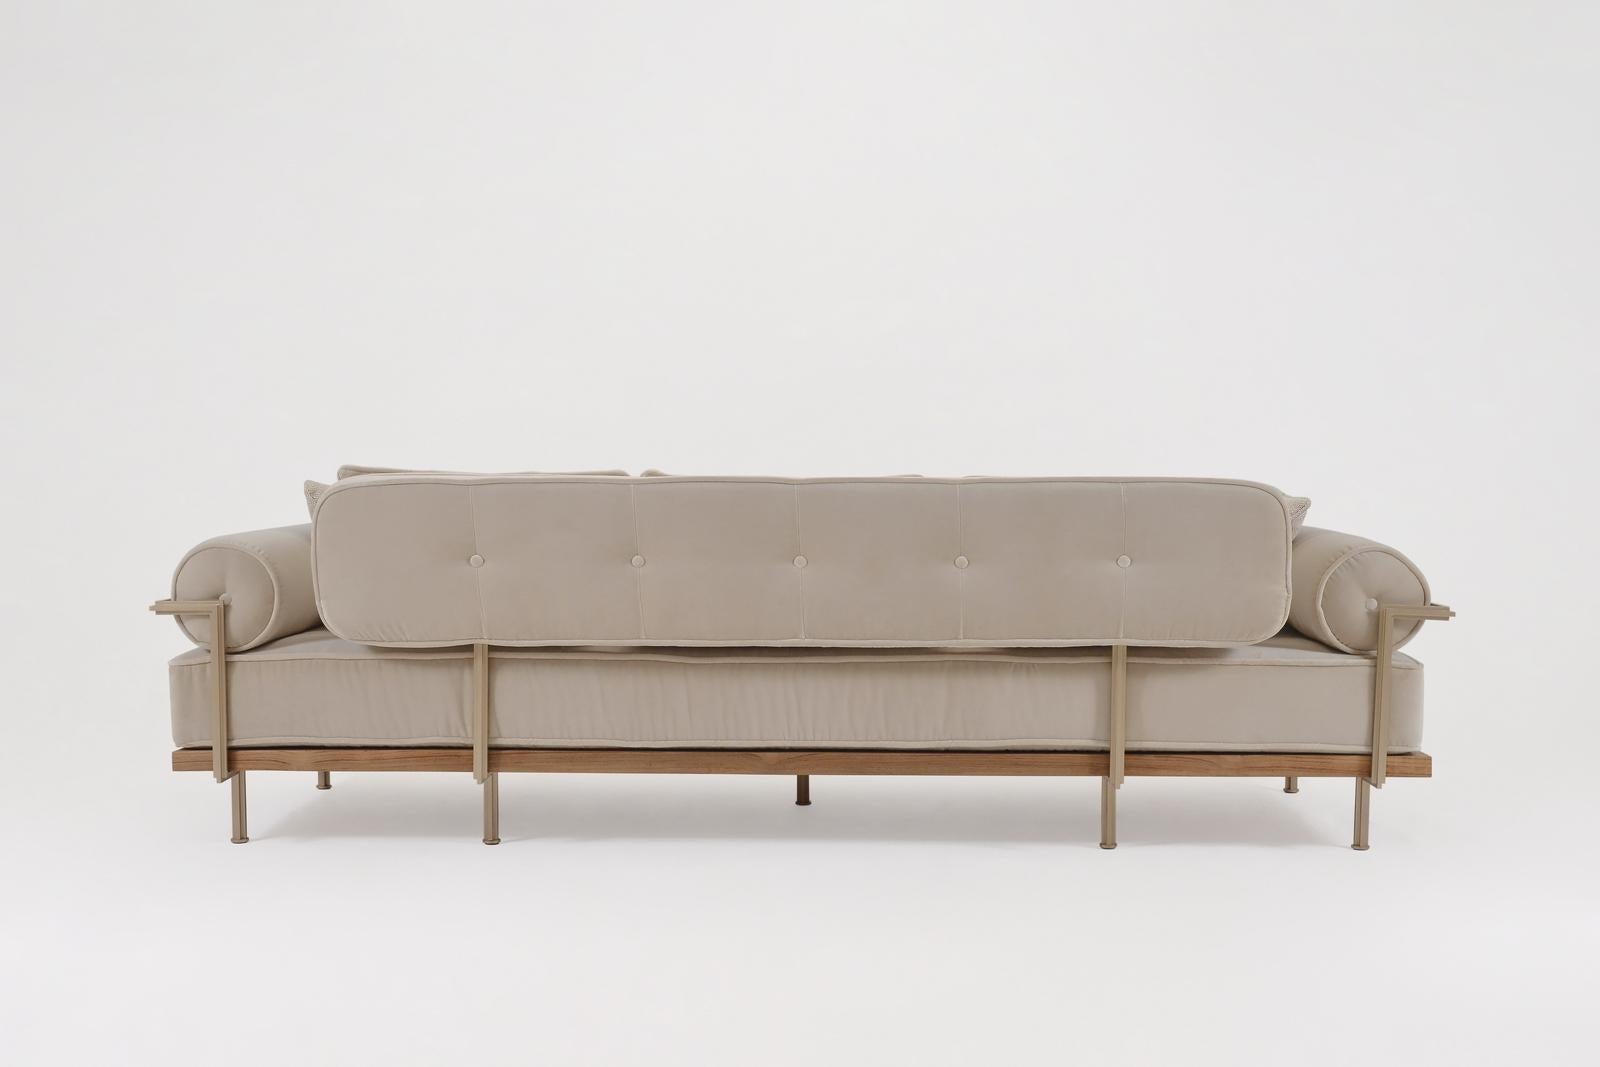 Hand-Crafted Bespoke 3 Seater Sofa Bleached Hardwood & Brass Frame by P. Tendercool (indoor) For Sale